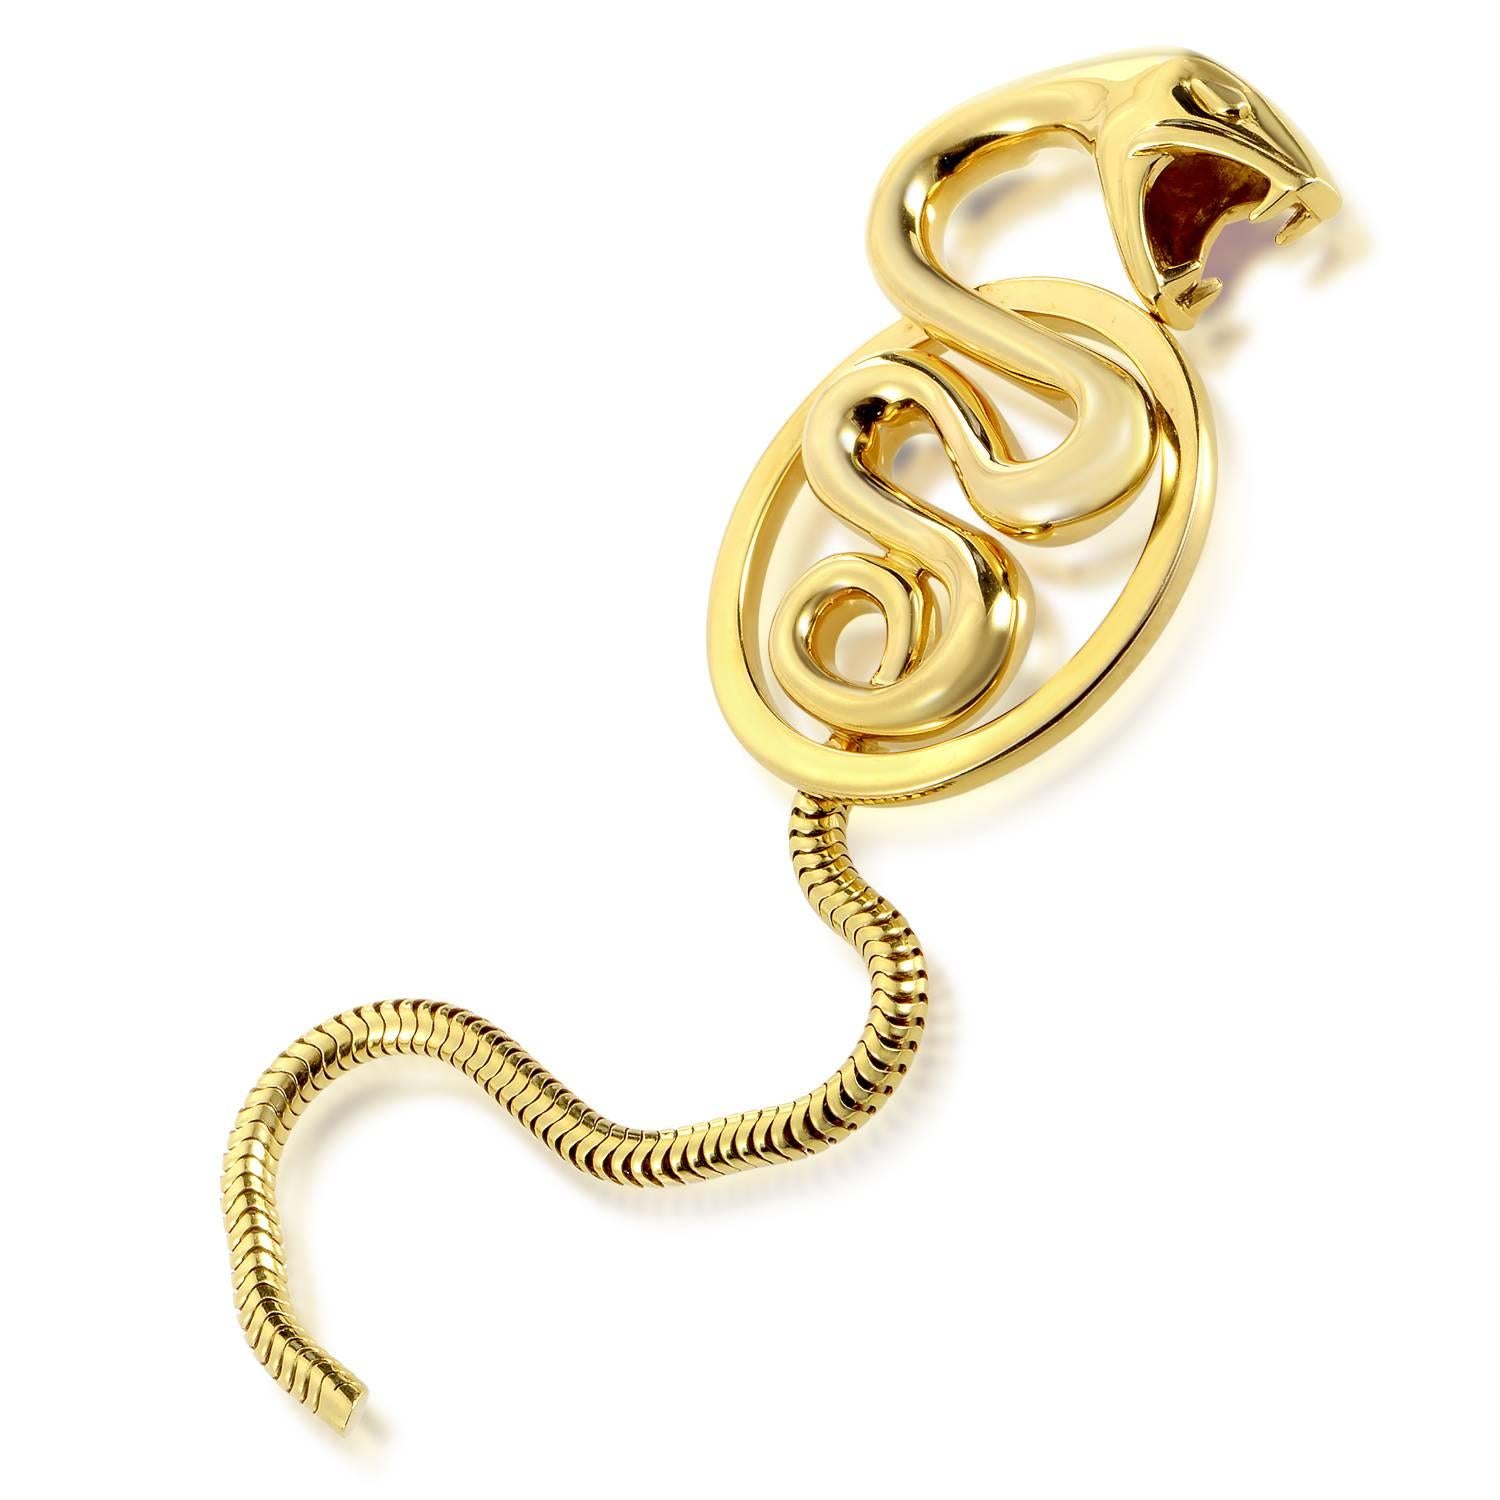 With its slick and supple body rising upwards while transforming into an immaculately gleaming shape, this exceptional item from Boucheron combines the majestic beauty of a serpent with the luxurious radiance of 18K yellow gold.
Included Items: